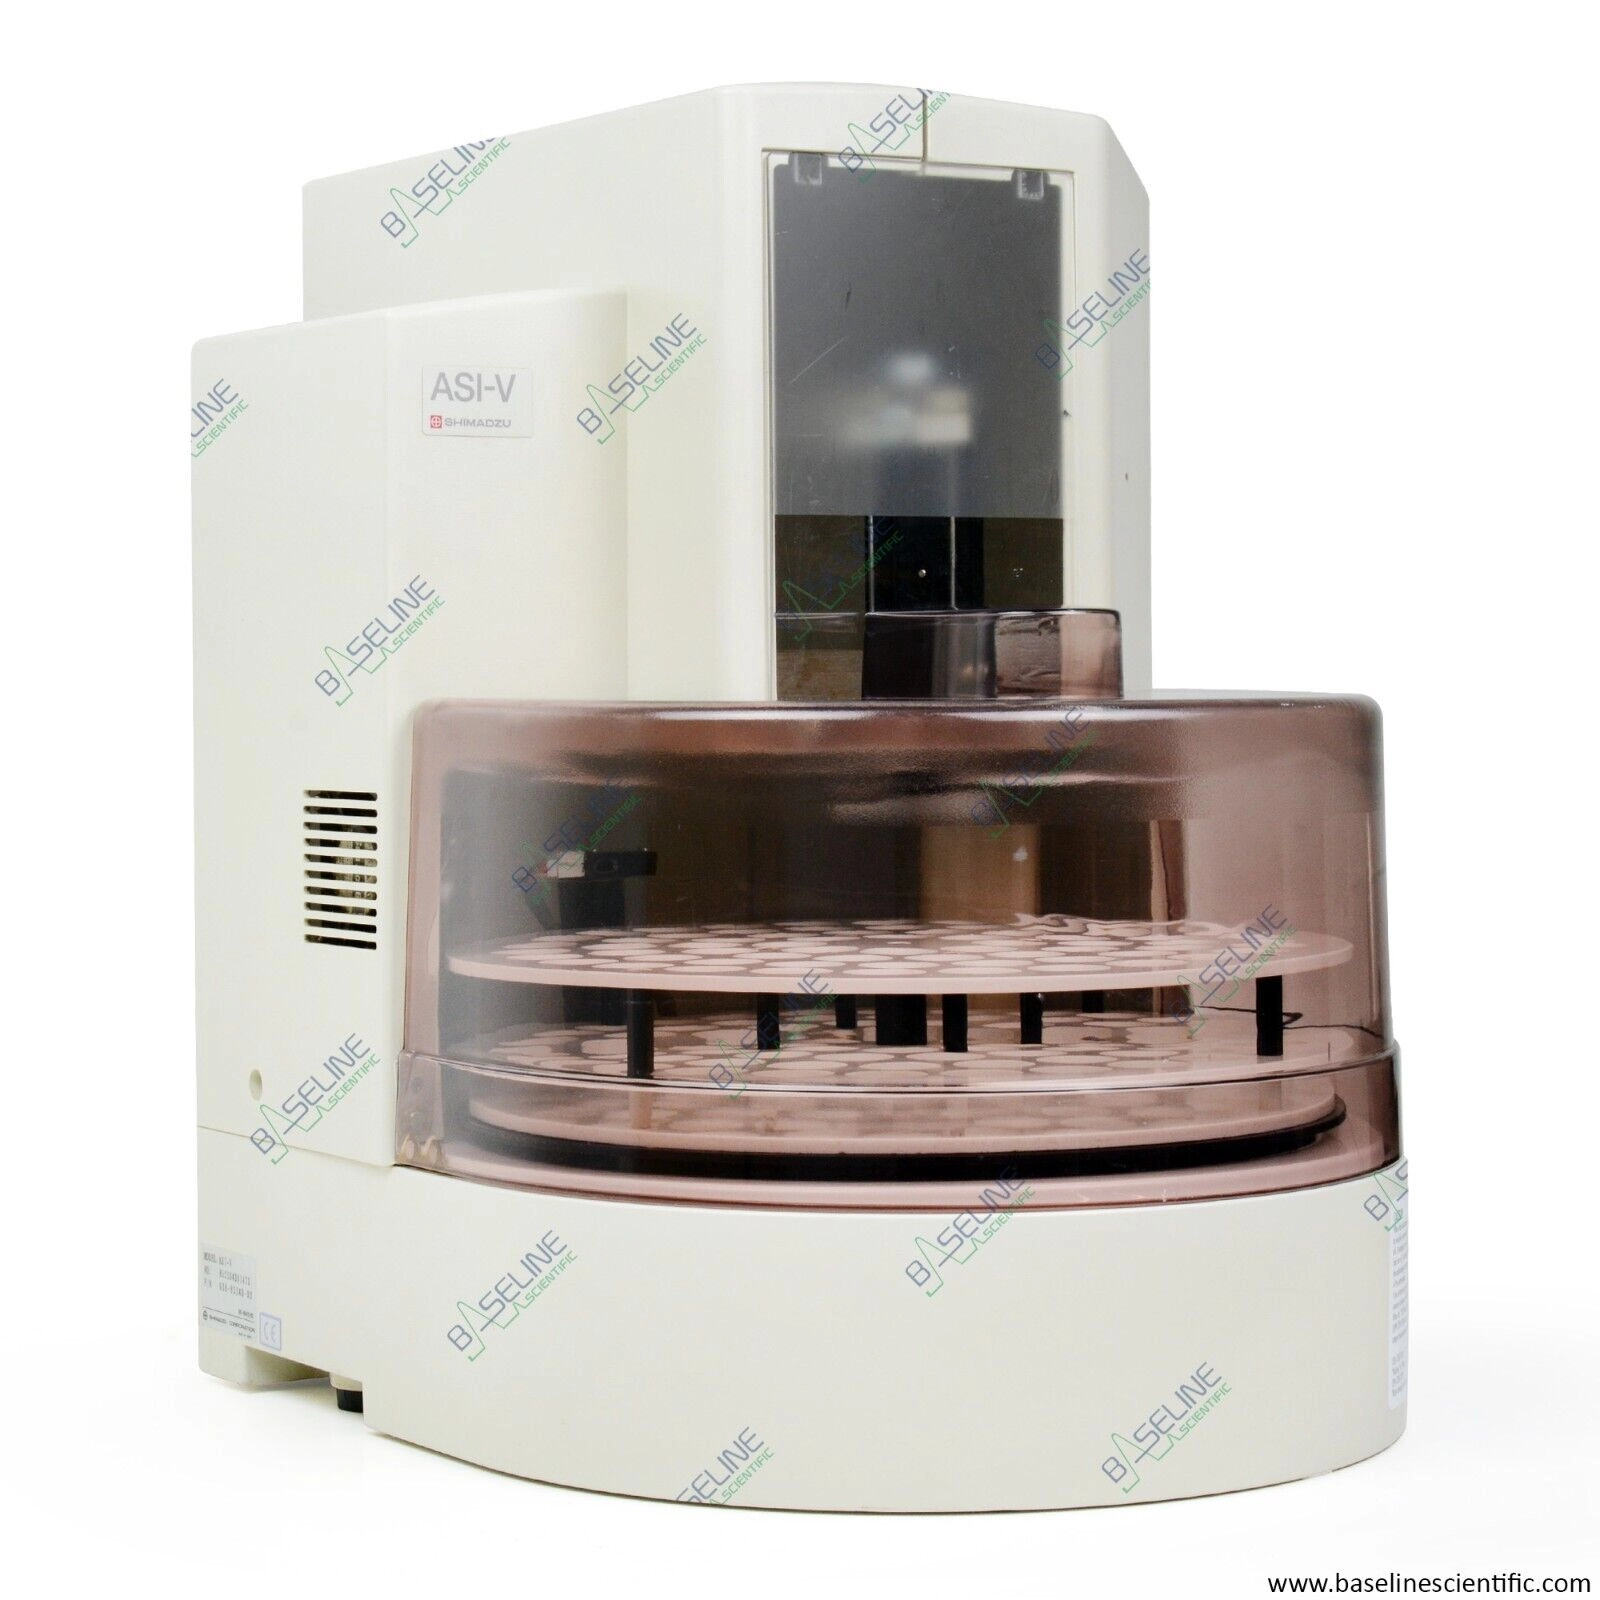 Shimadzu TOC ASI-V Autosampler with 1 YEAR WARRANT